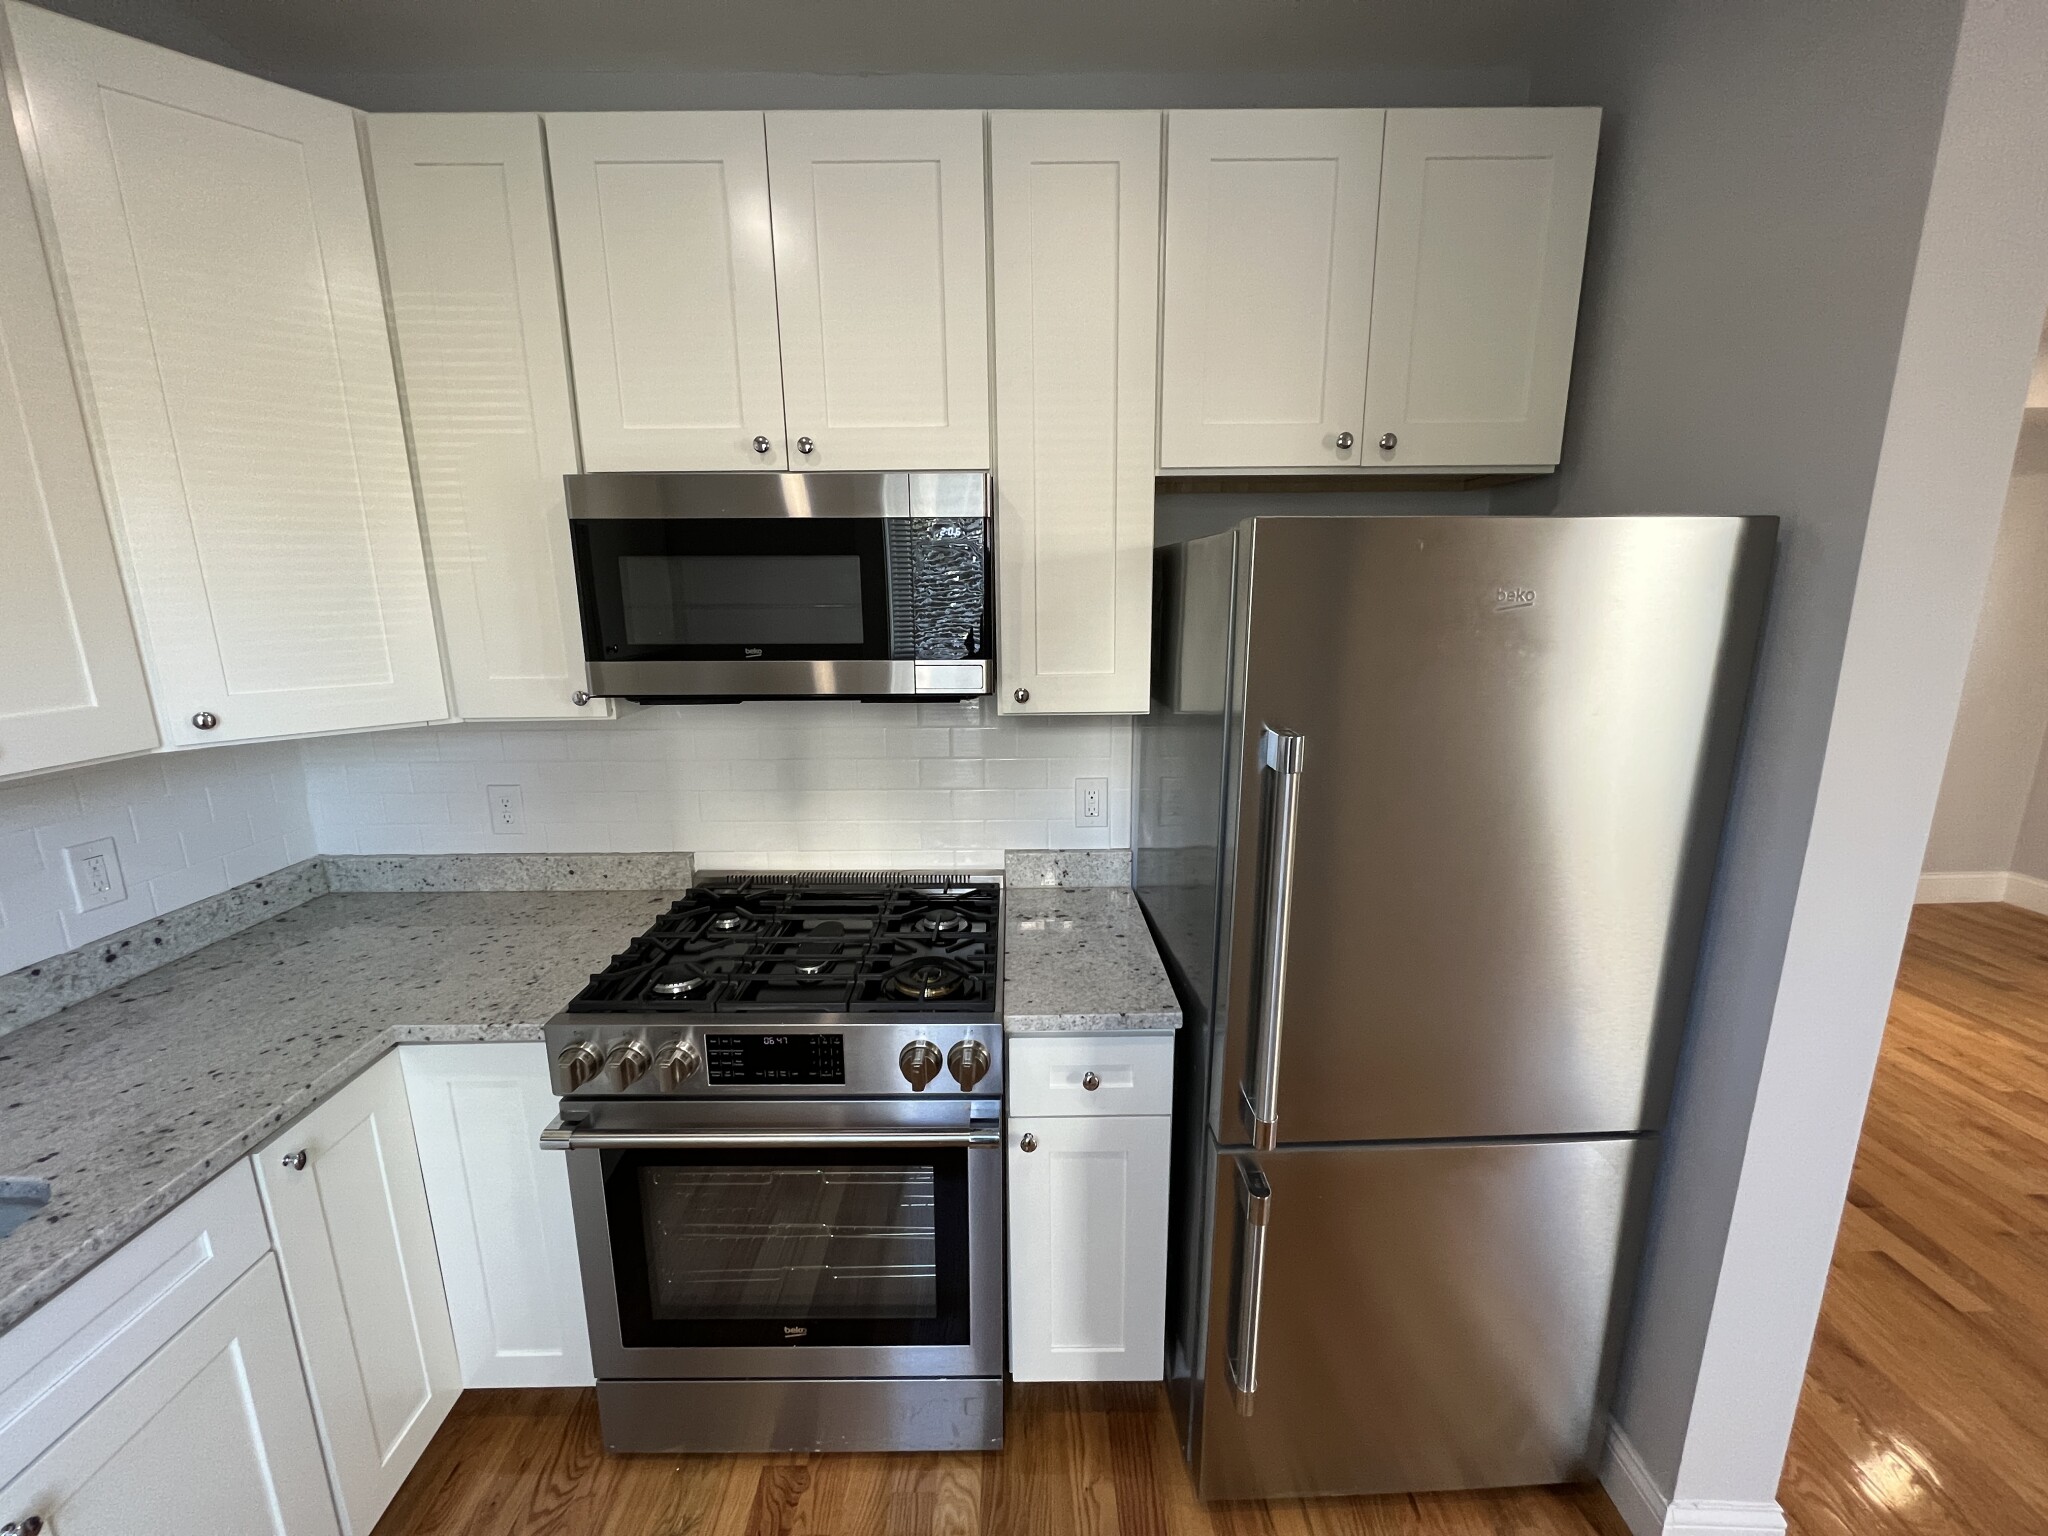 Photos of apartment on Concord Turnpike,Cambridge MA 02140